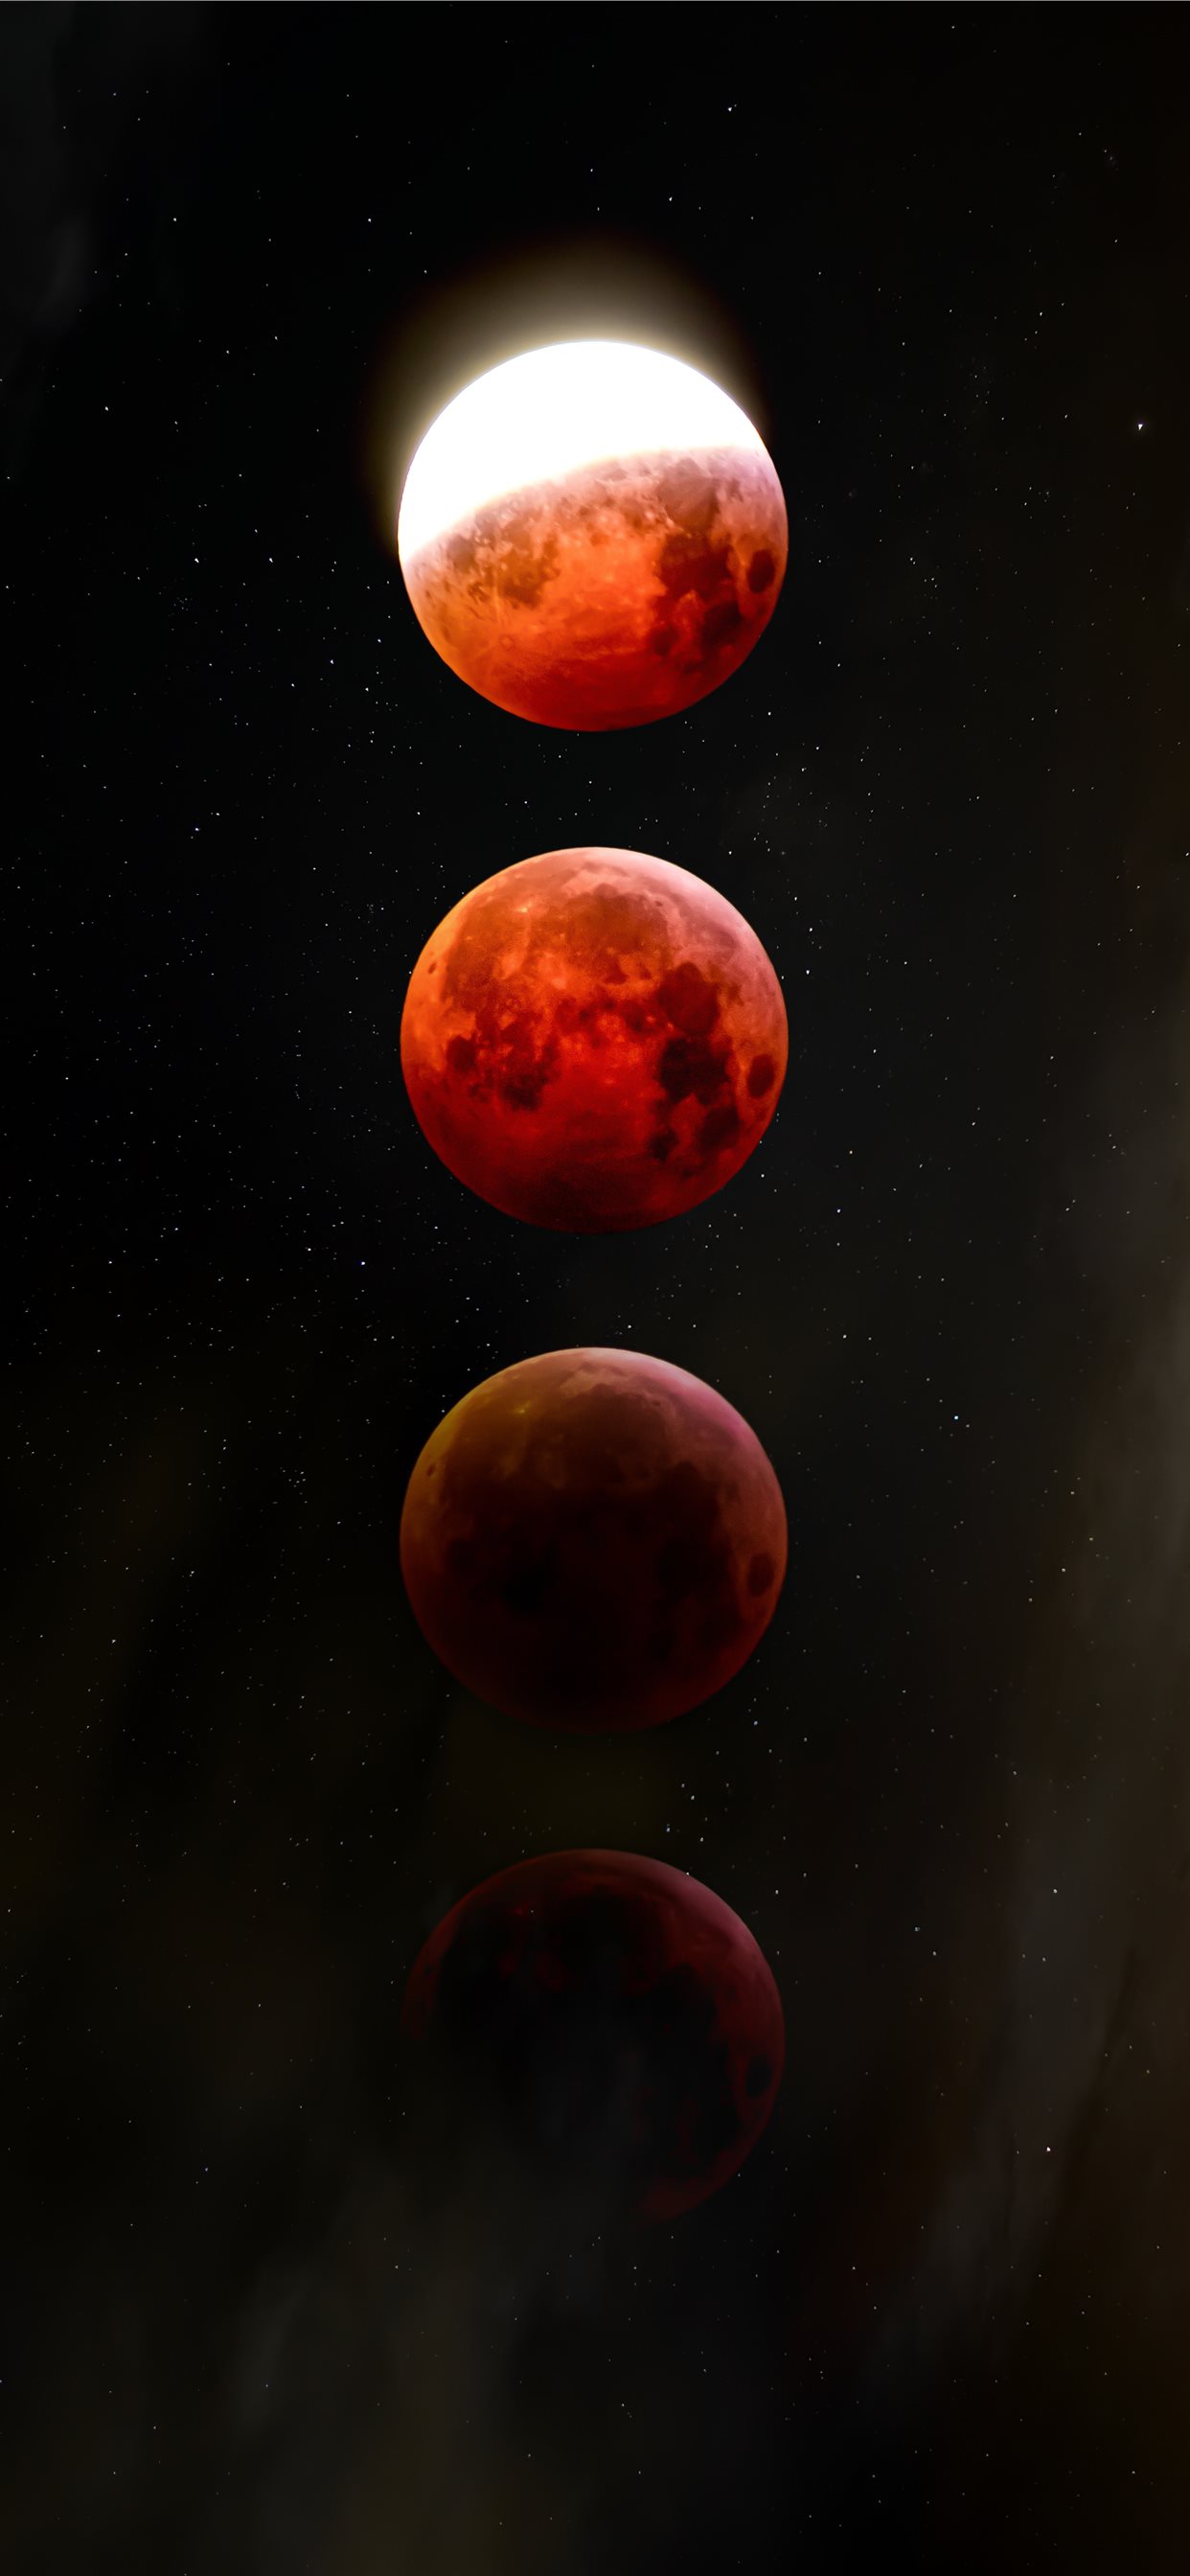 Lunar Eclipse 2019 iPhone X Wallpapers Free Download